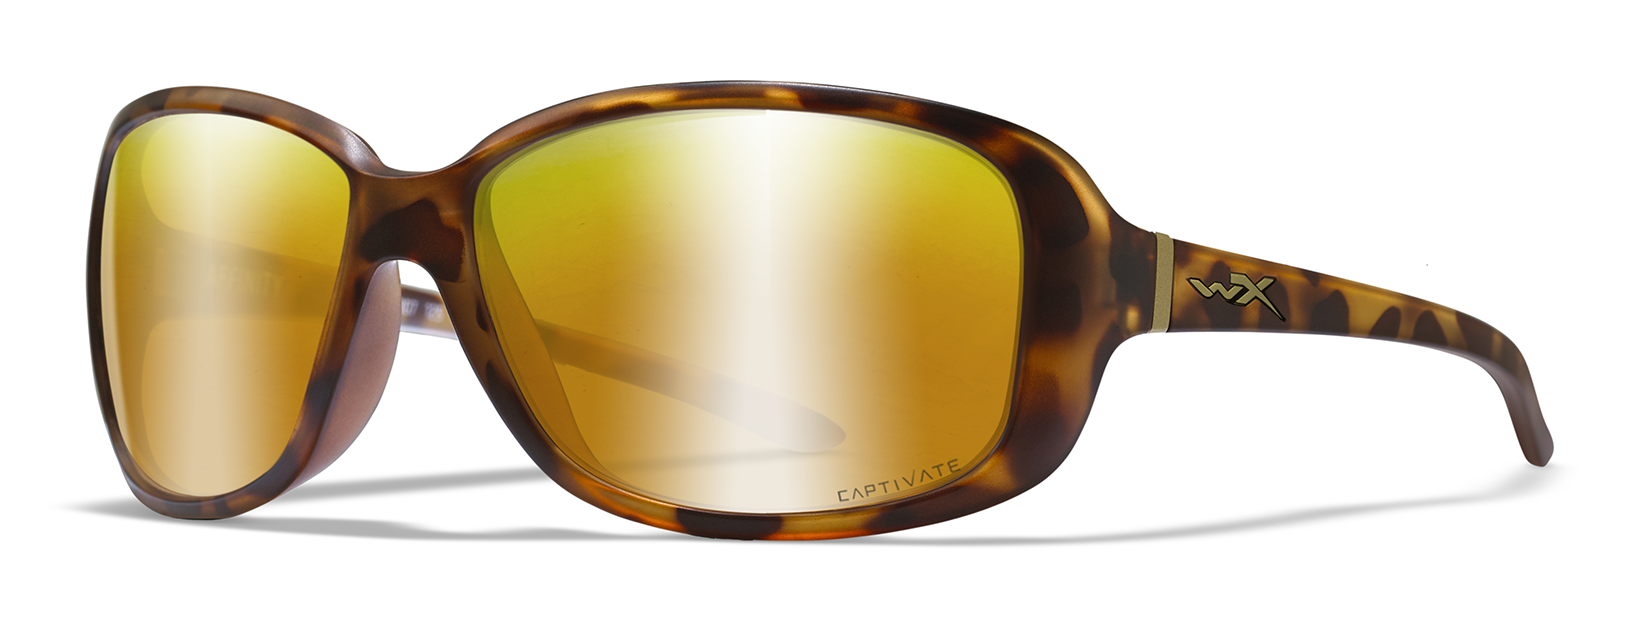 wiley x affinity sunglasses in brown tortoise with polarized bronze lenses